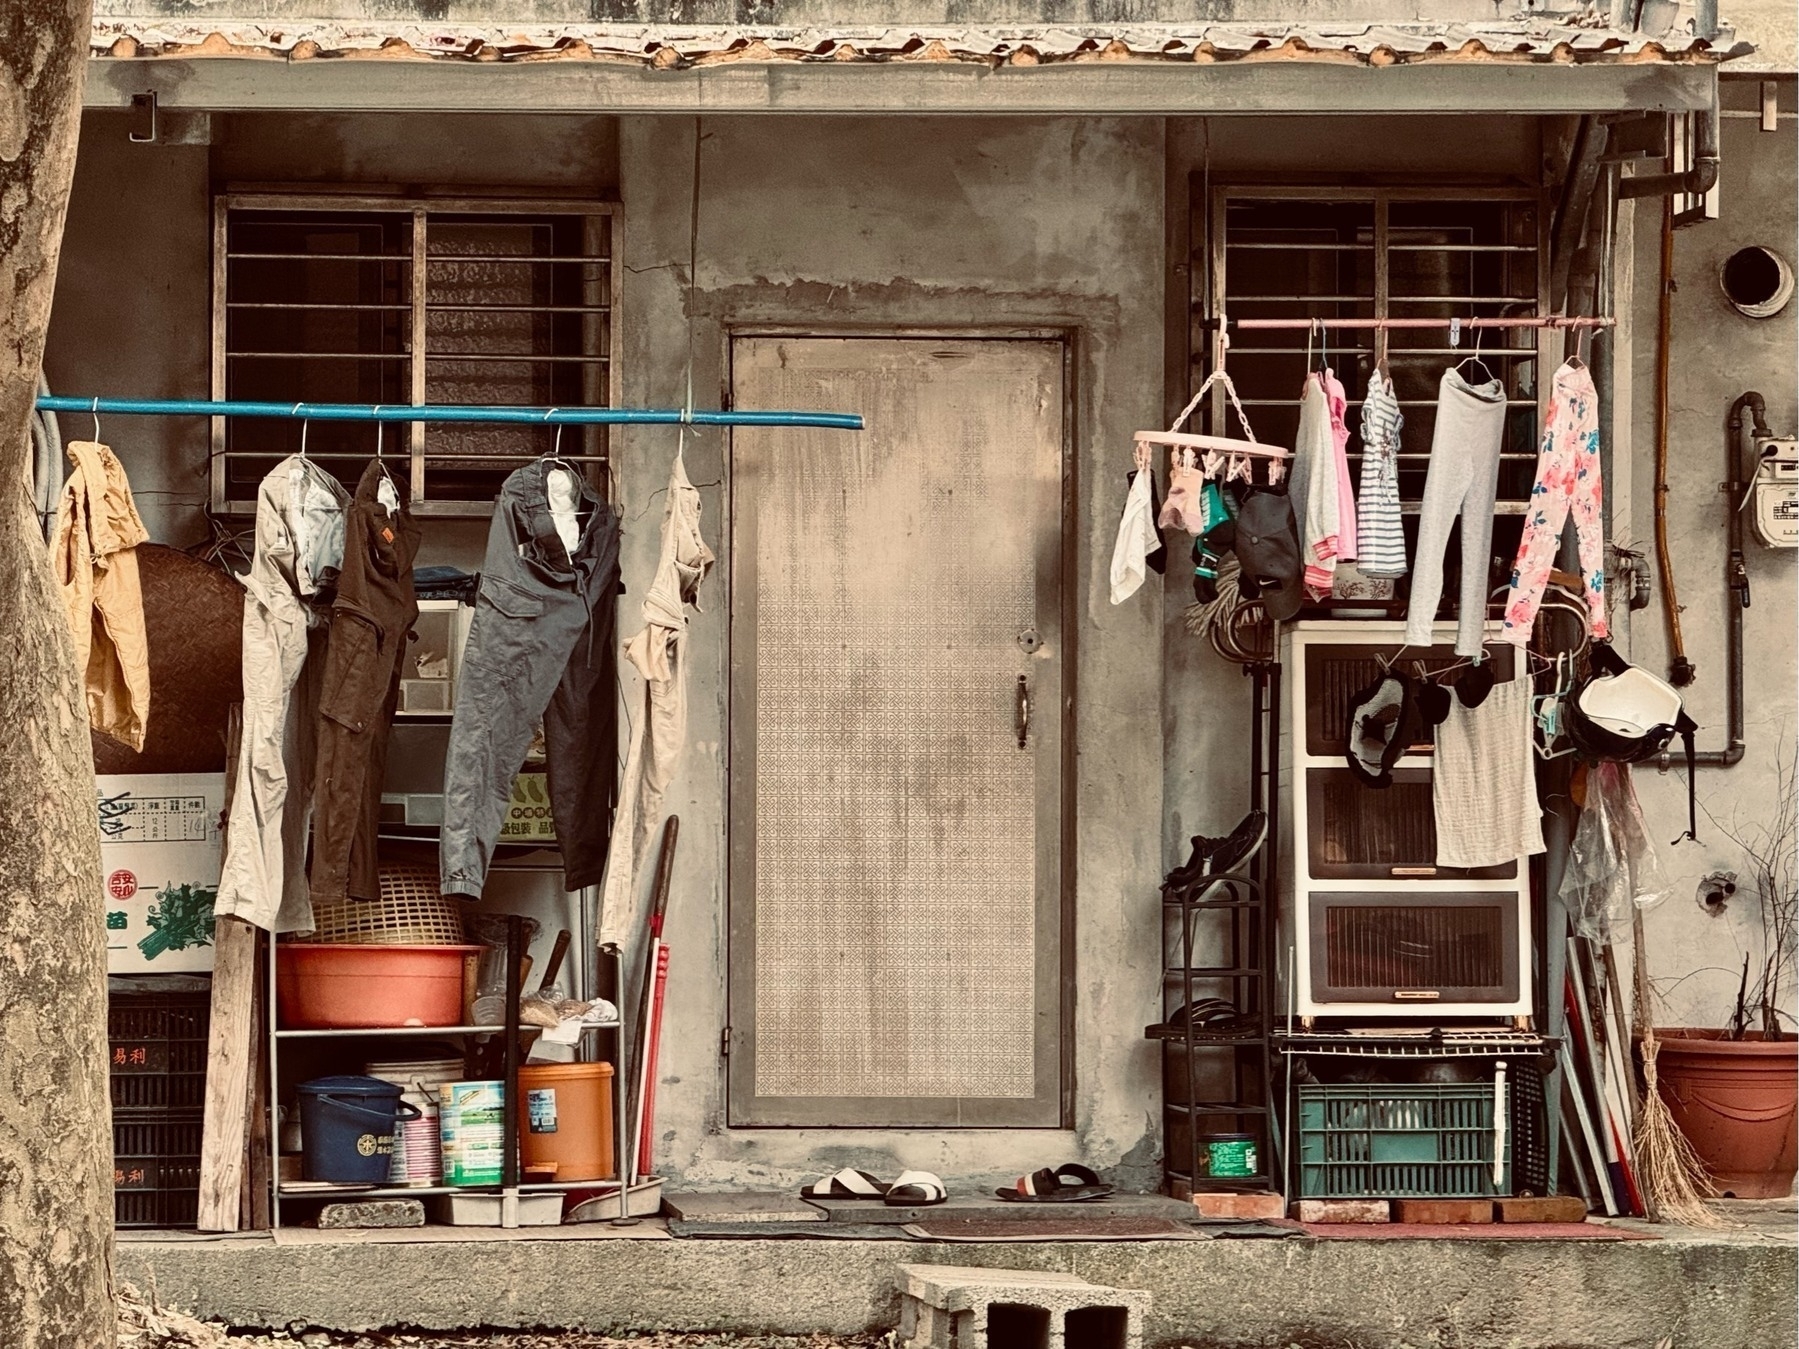 The front door of an old and tired single-storey abode with washing hanging out front on both sides, flip-flops on the doorstep. A scene perhaps hard to age